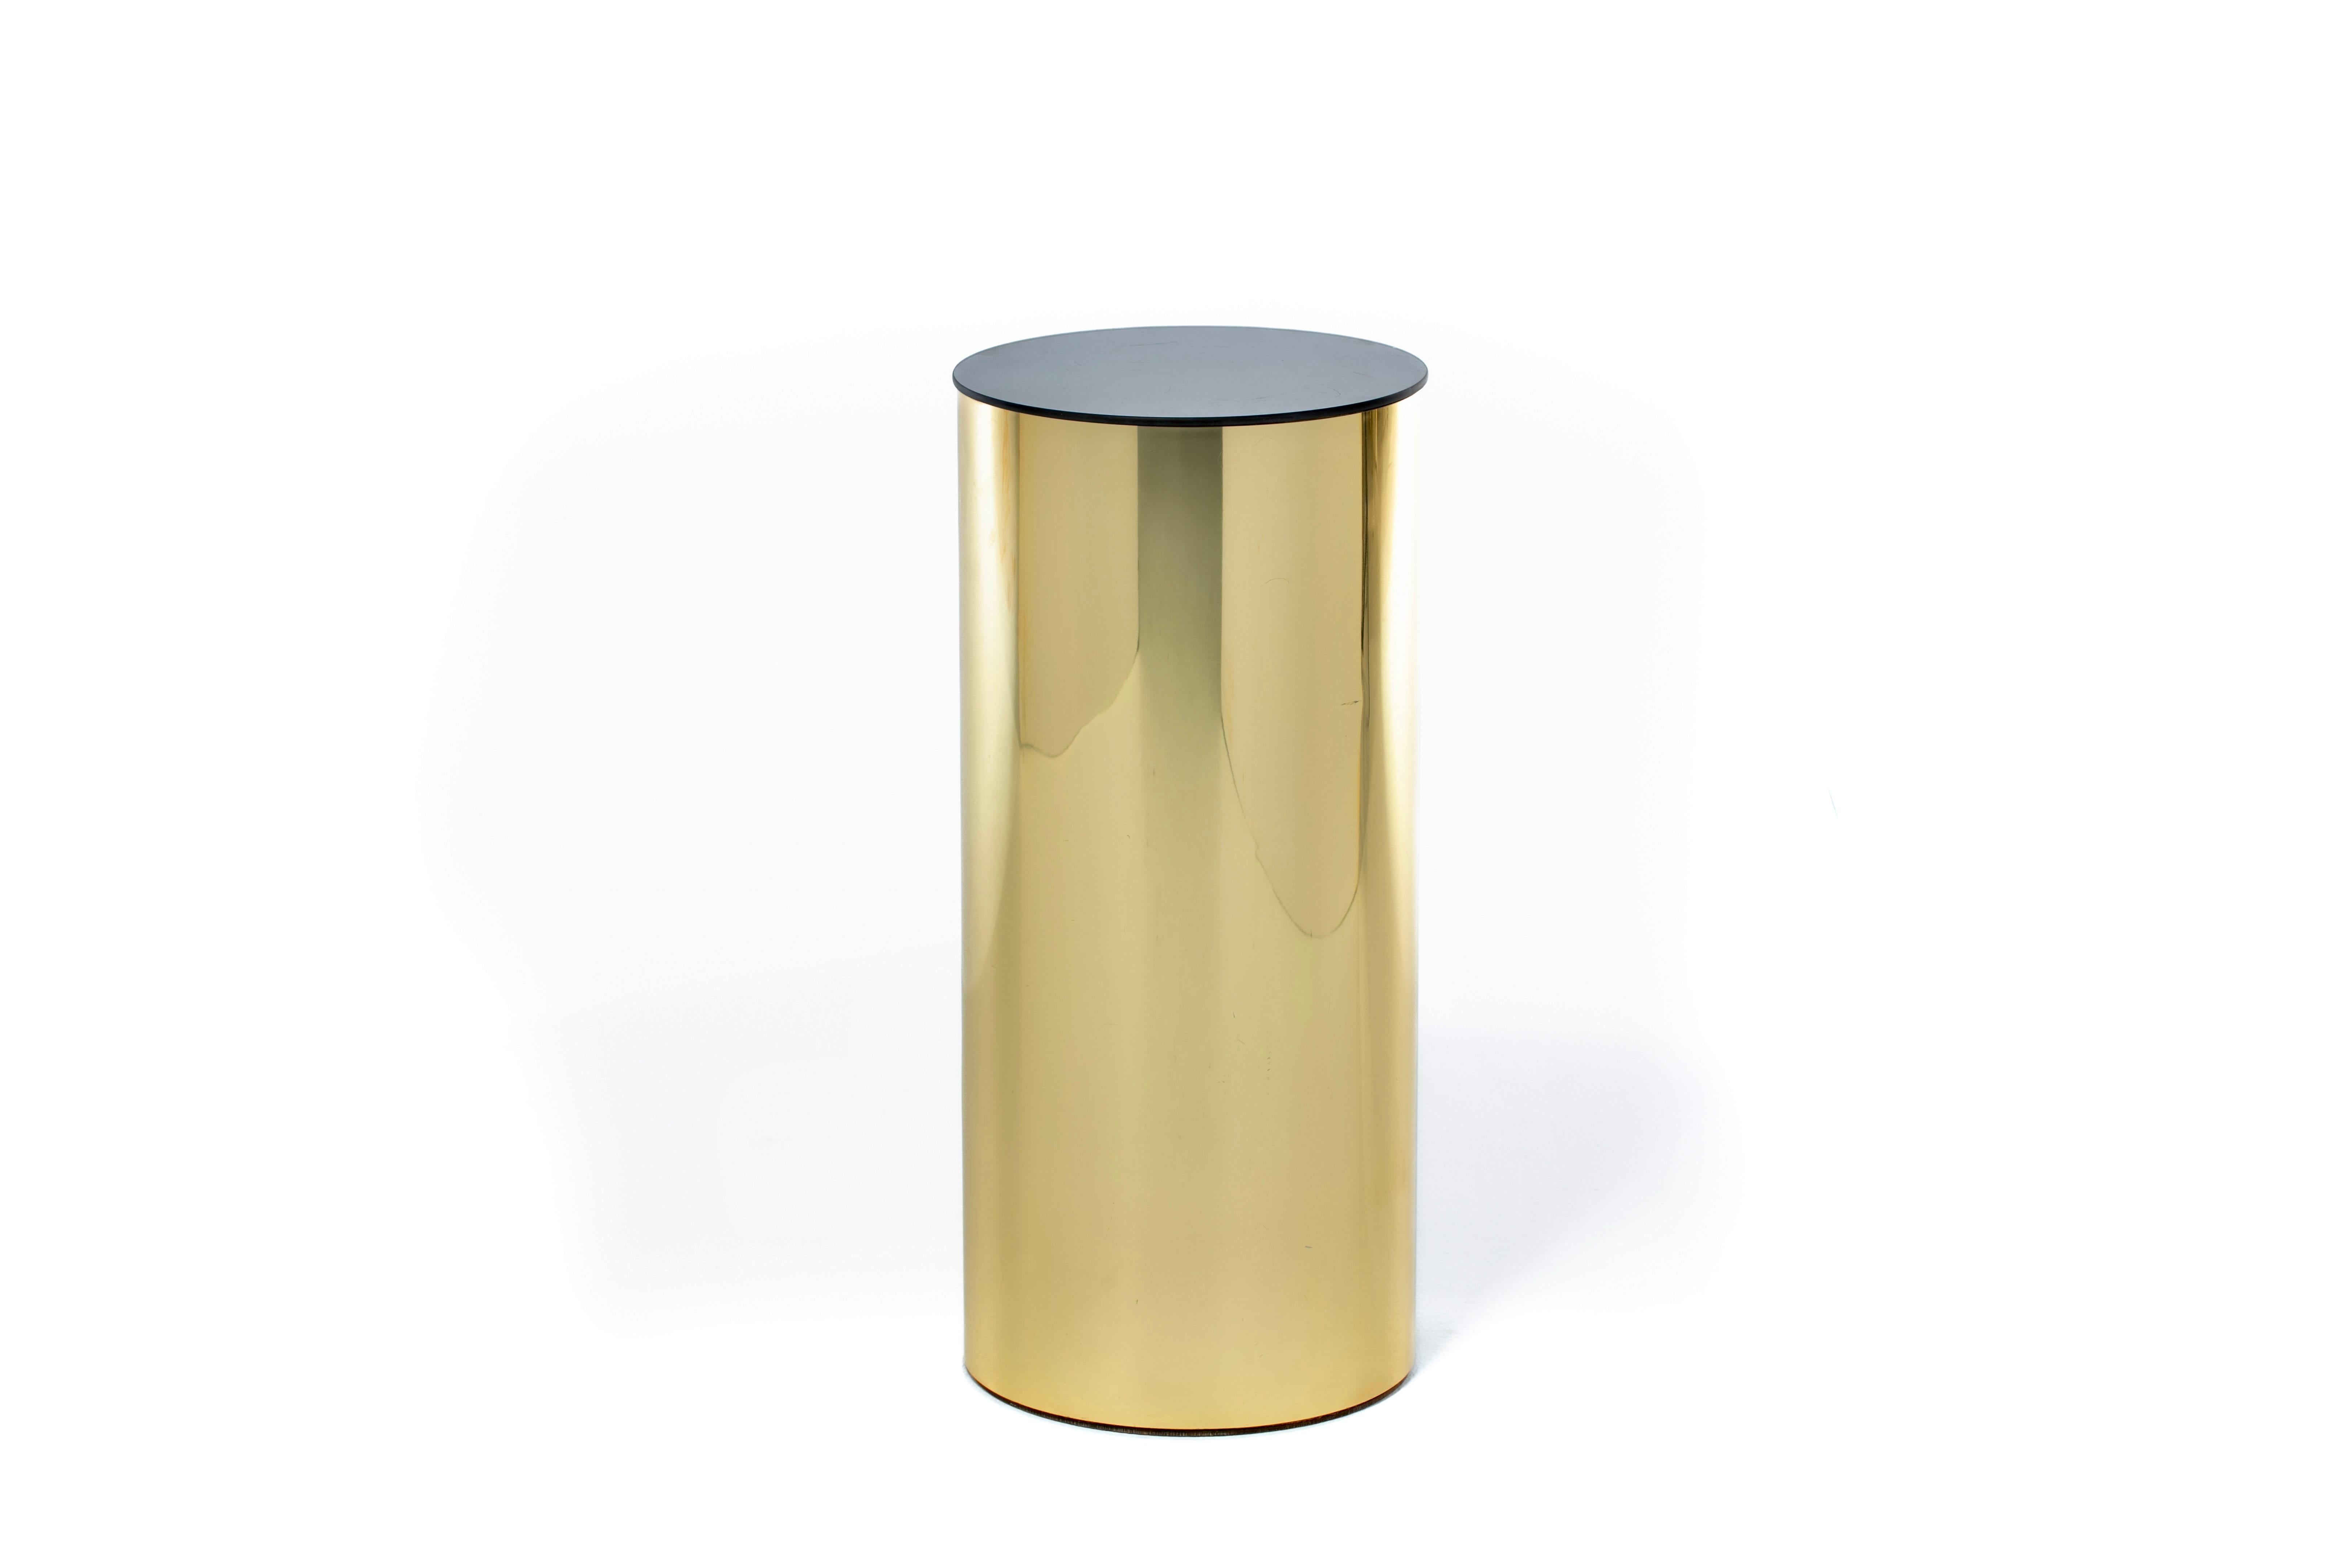 Post Modern Curtis Jere Circular Pedestal of Brass and Smoked Glass, c. 1984 For Sale 2